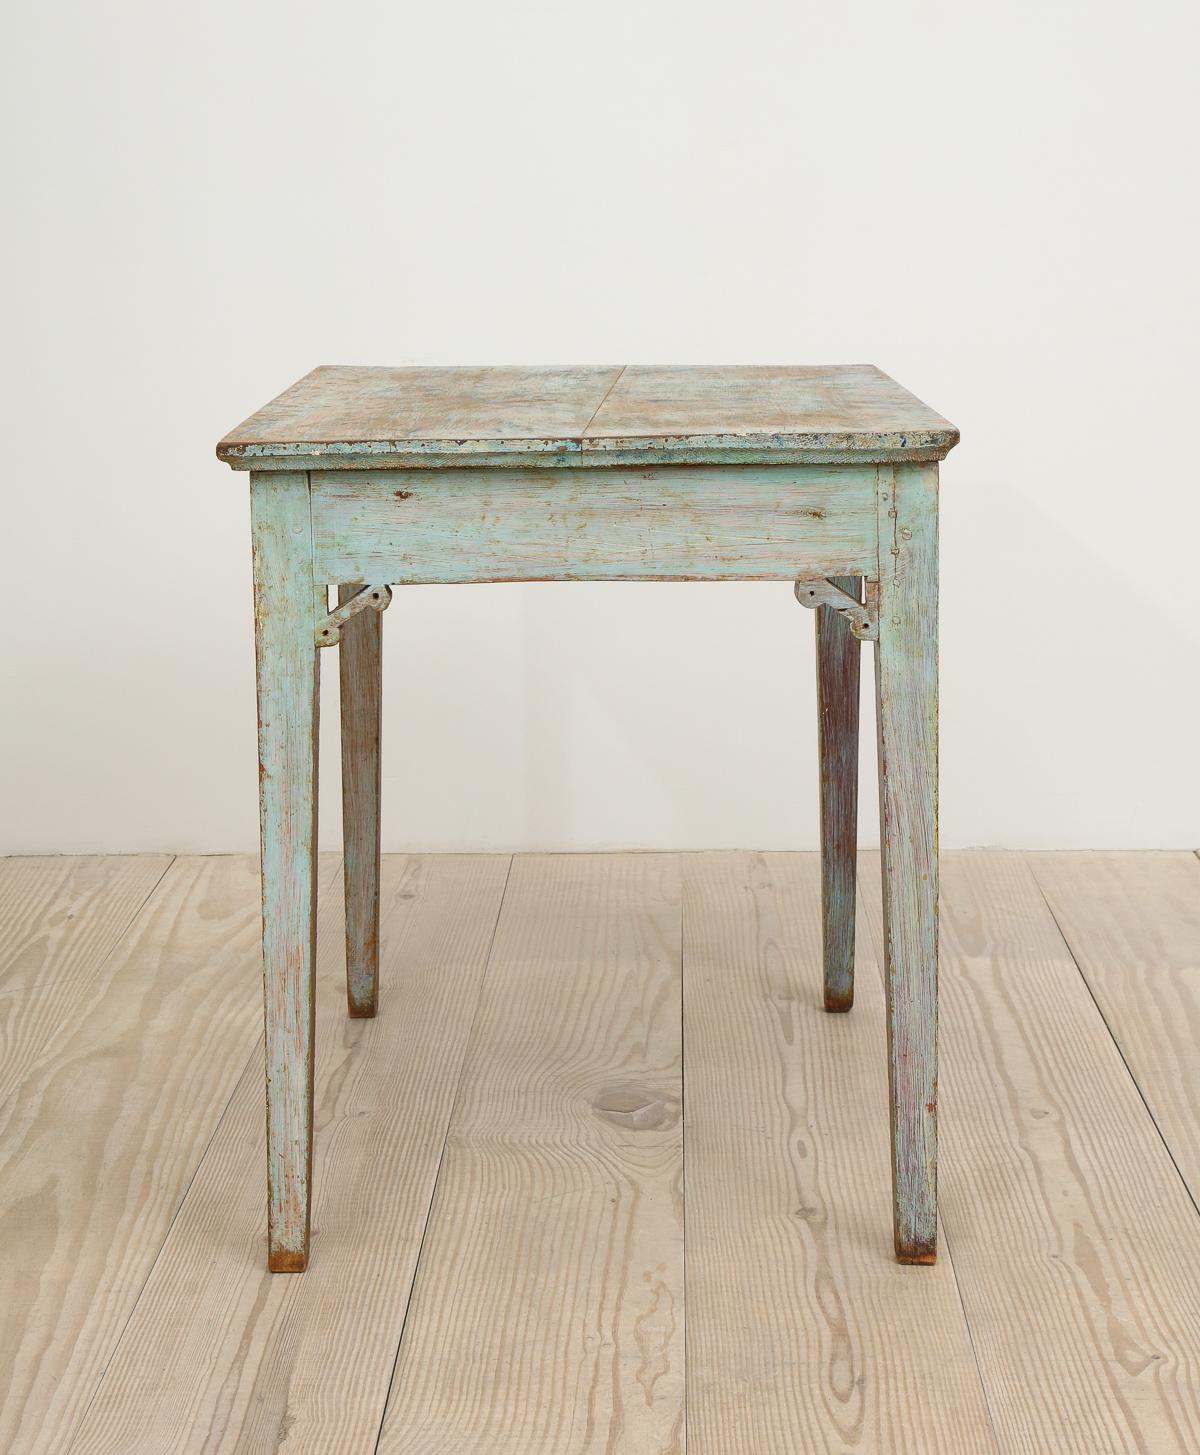 18th Century and Earlier Gustavian 18th Century Table with Faux Marble-Top Center Drawer, Origin: Sweden